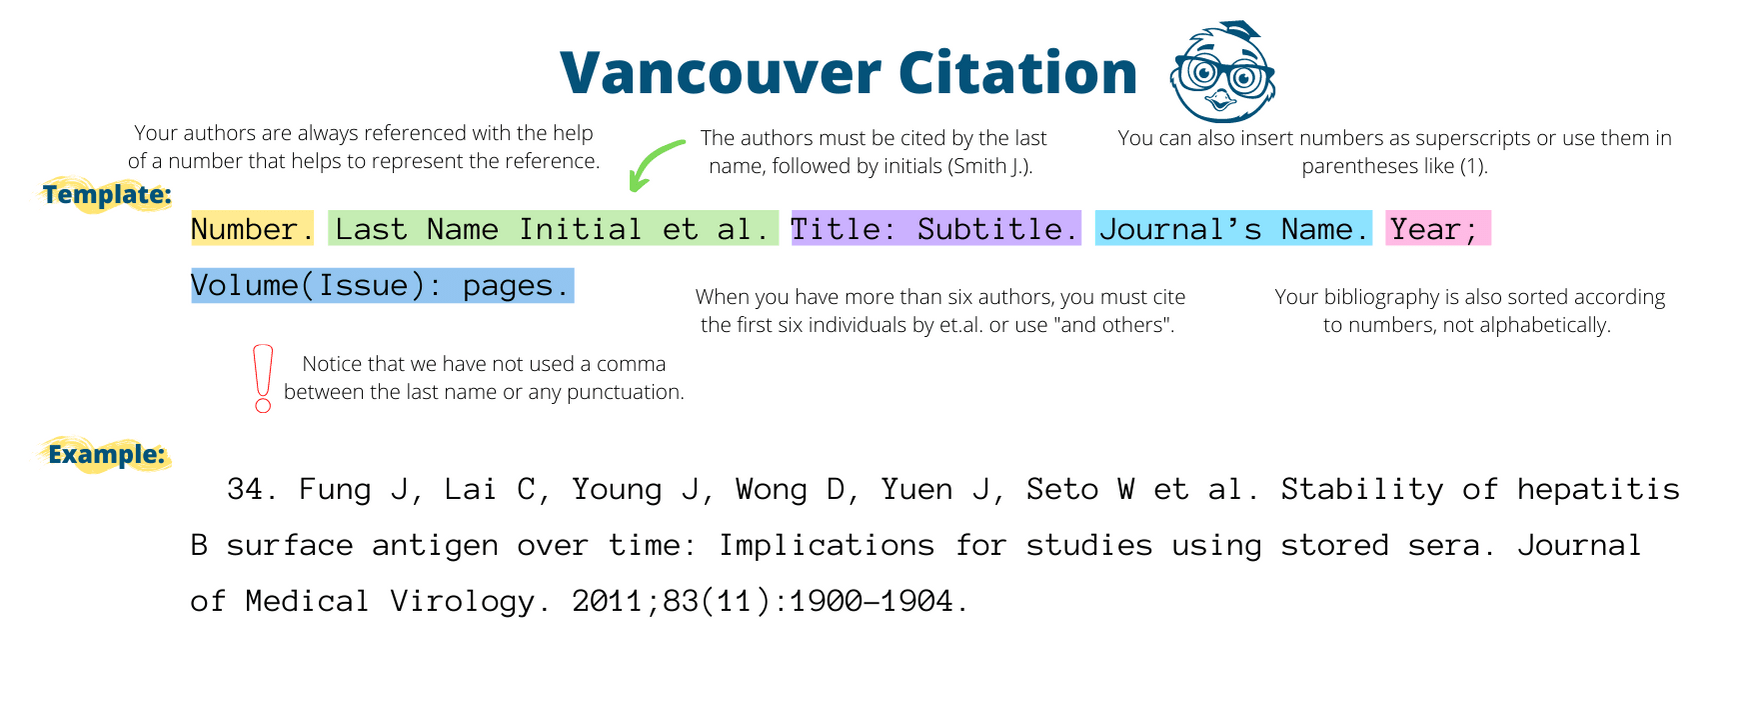 How to cite in vancouvers style